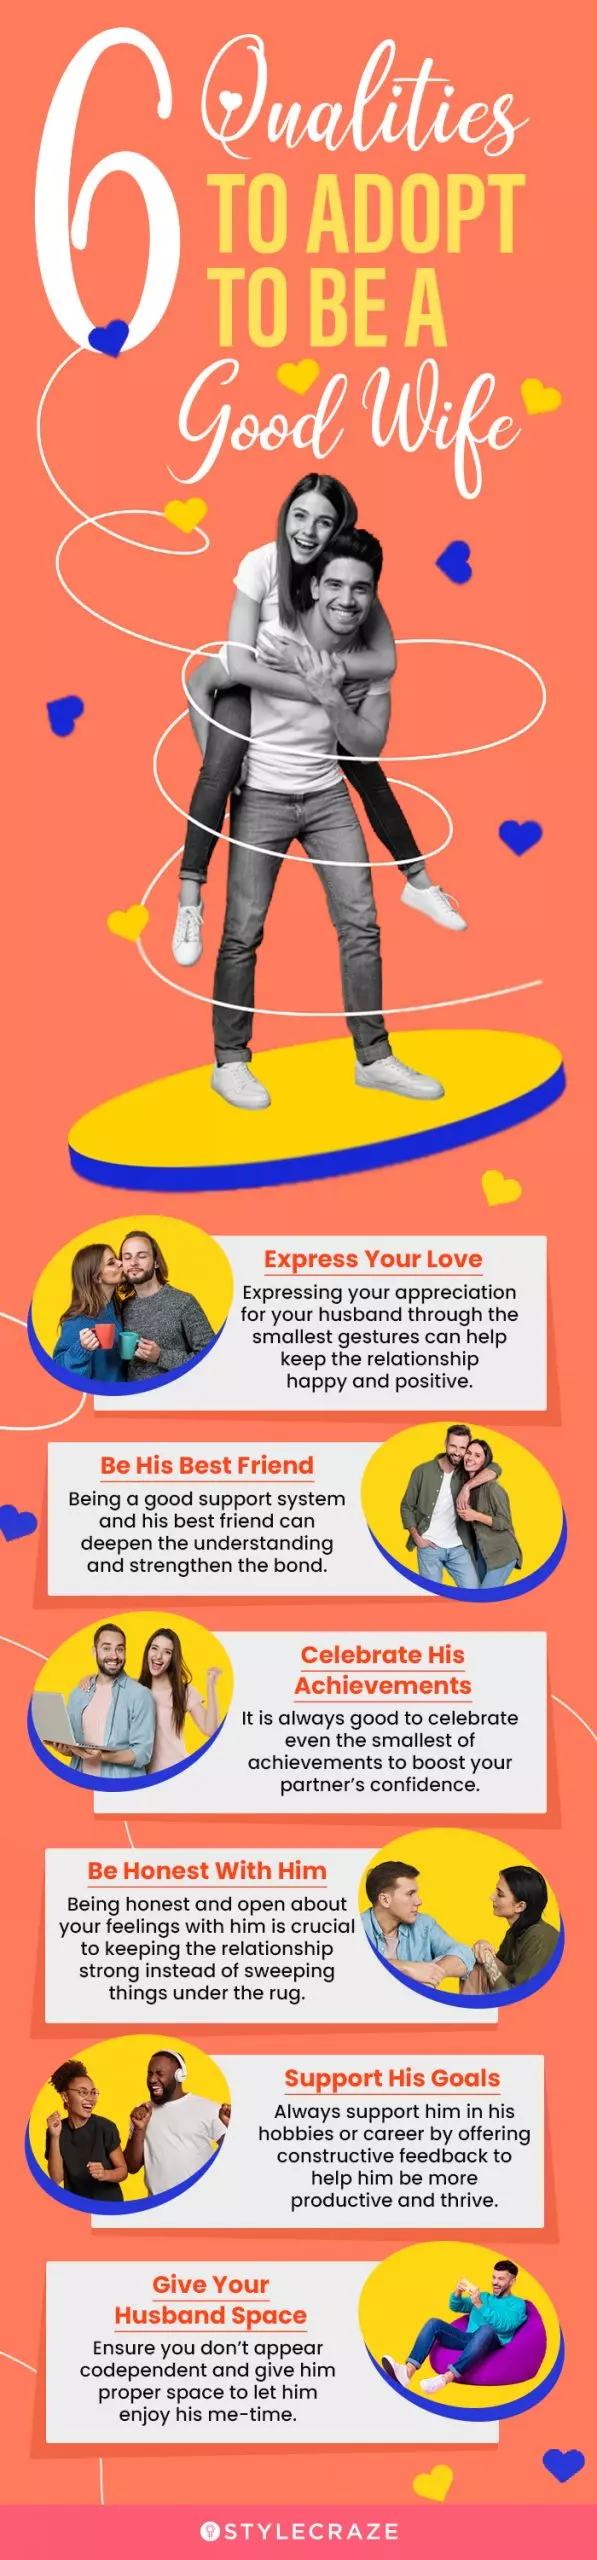 6 qualities to adopt to be a good wife (infographic)